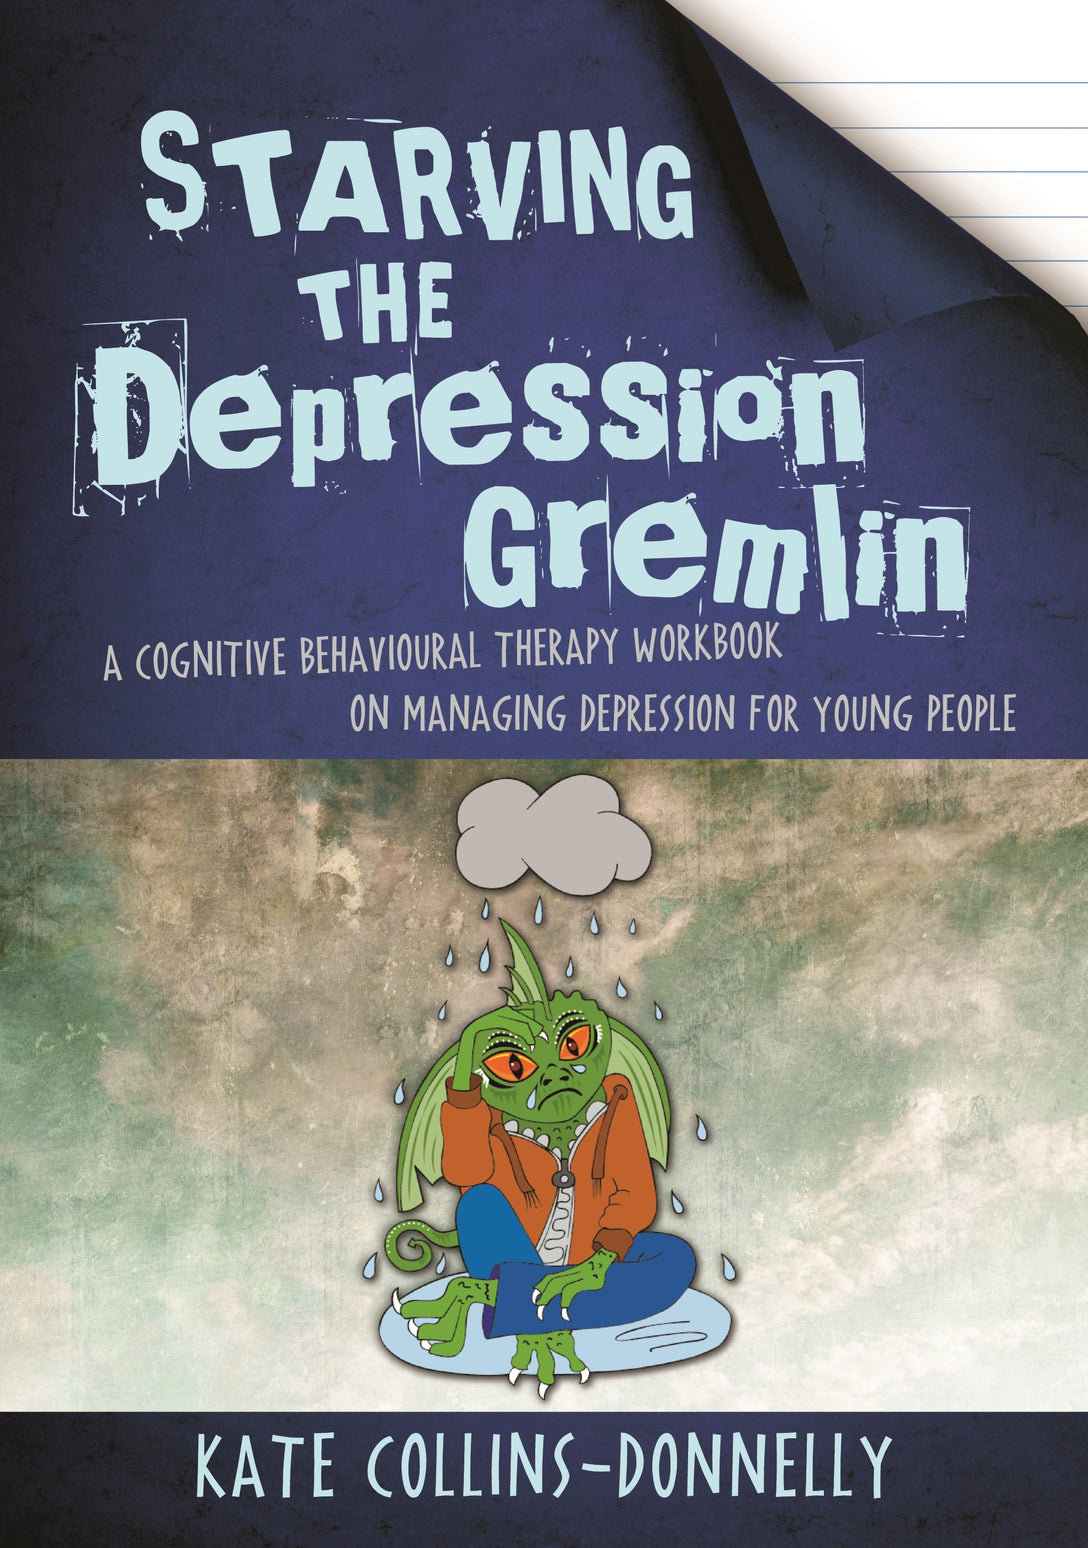 Starving the Depression Gremlin by Kate Collins-Donnelly, Kate Collins-Donnelly, Tina Gothard